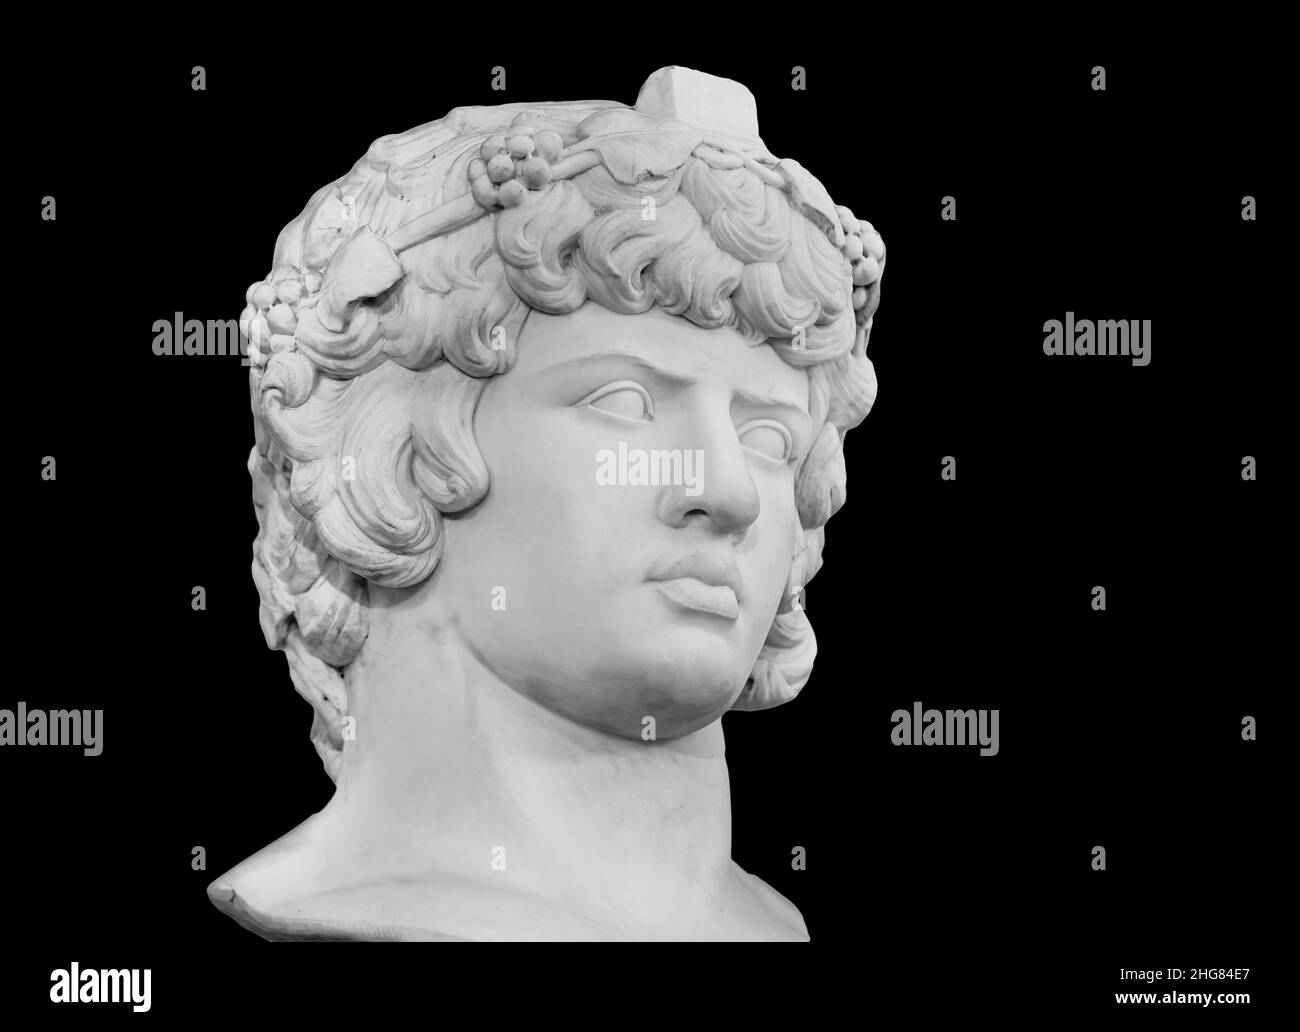 Gypsum copy of famous ancient statue Antinous head isolated on a black background. Plaster antique sculpture young man face. Renaissance epoch Stock Photo